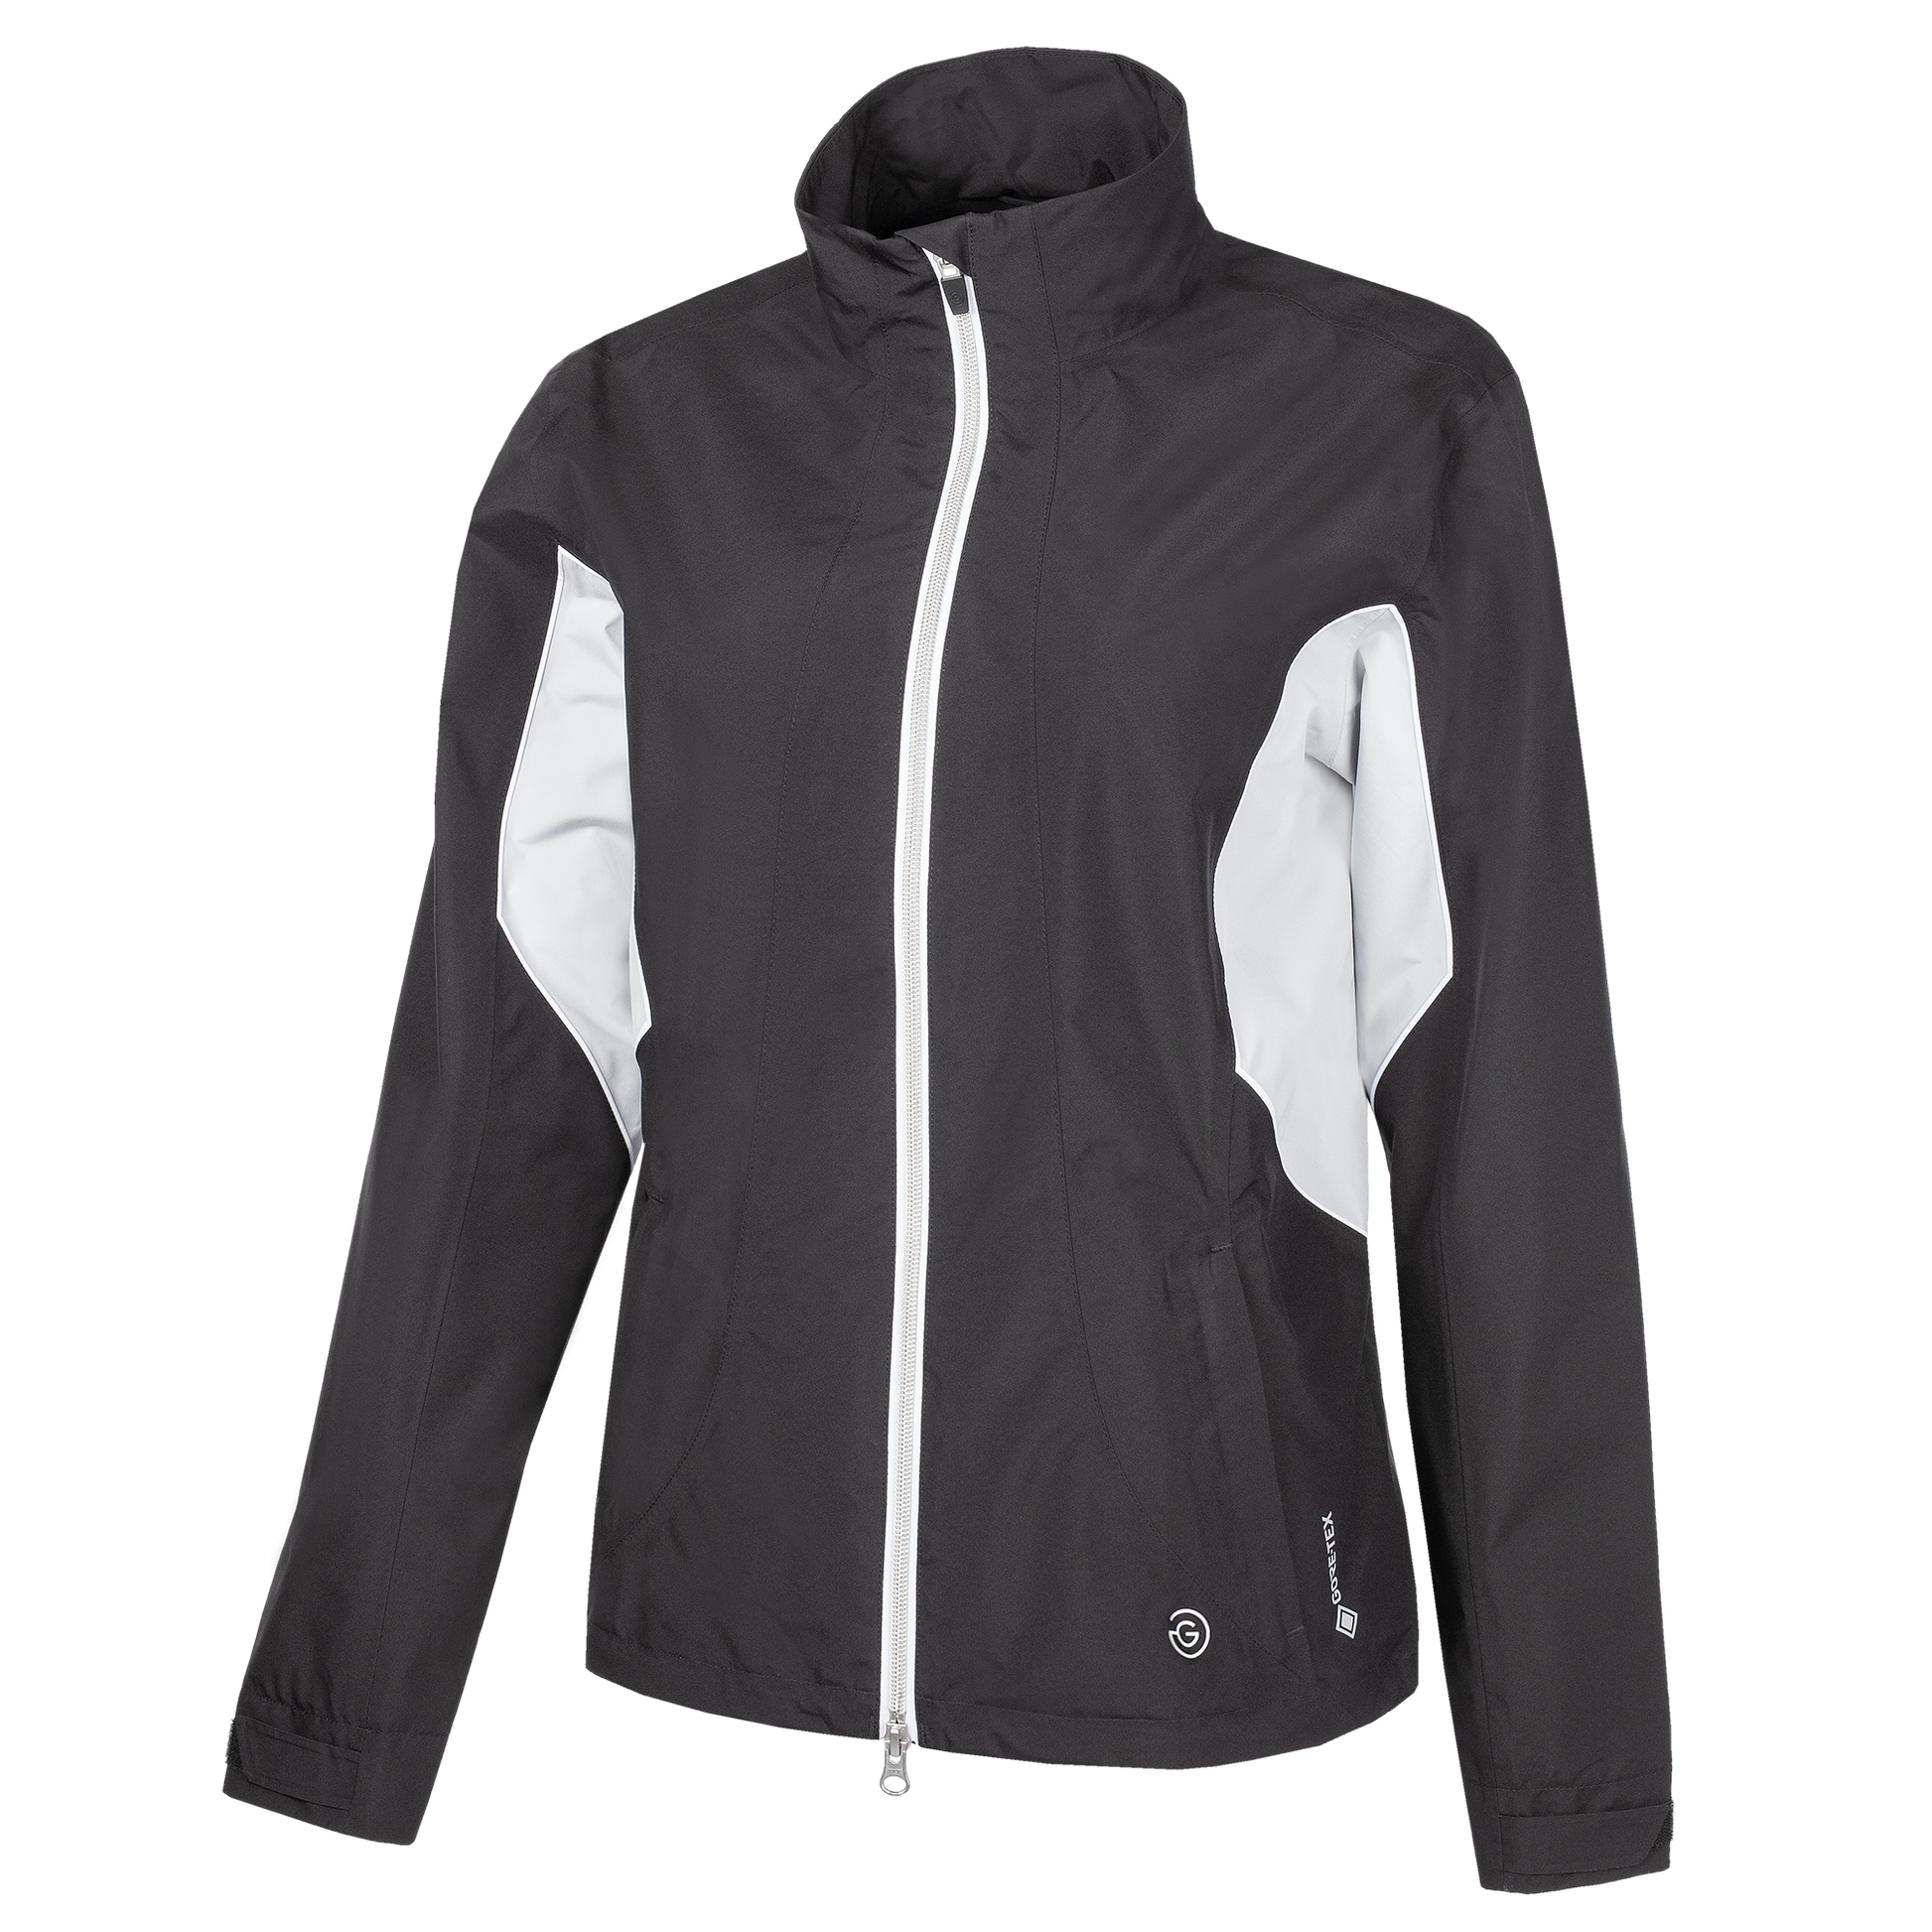 Galvin Green Ladies GORE-TEX Jacket with Lining in Black and White